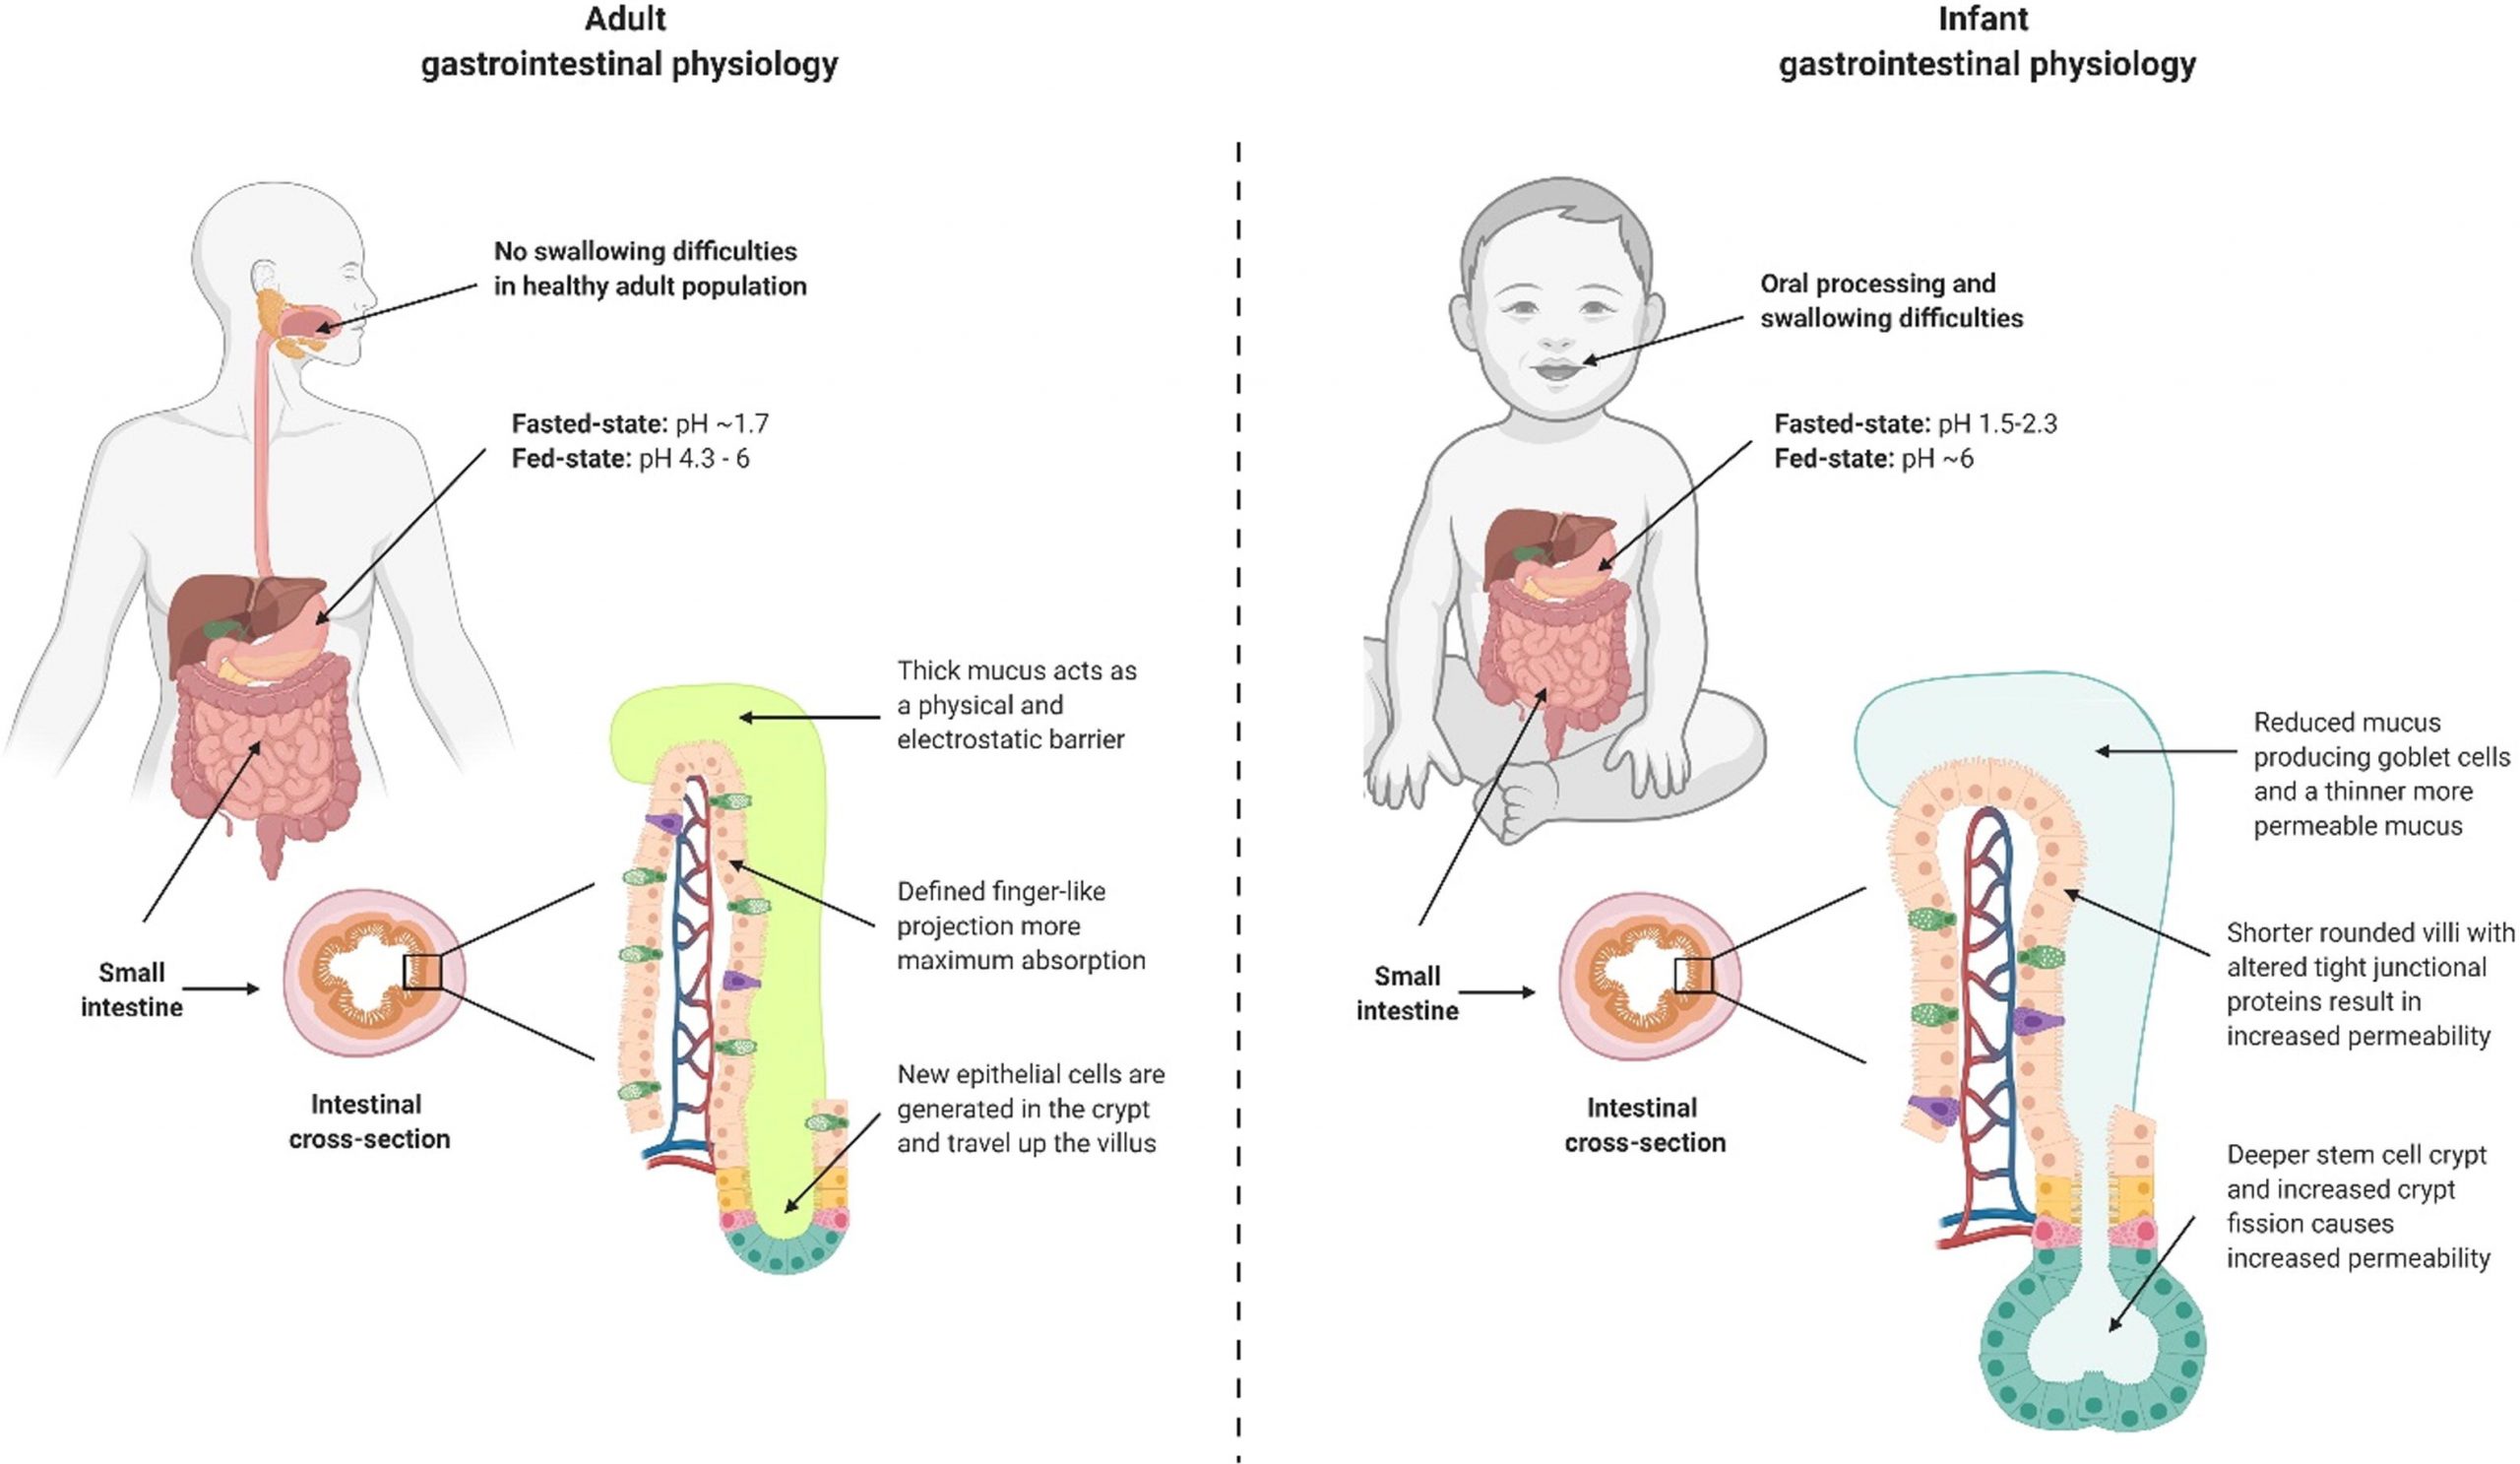 The physiological barriers to delivering oral macromolecular drugs in infants differ from adults.